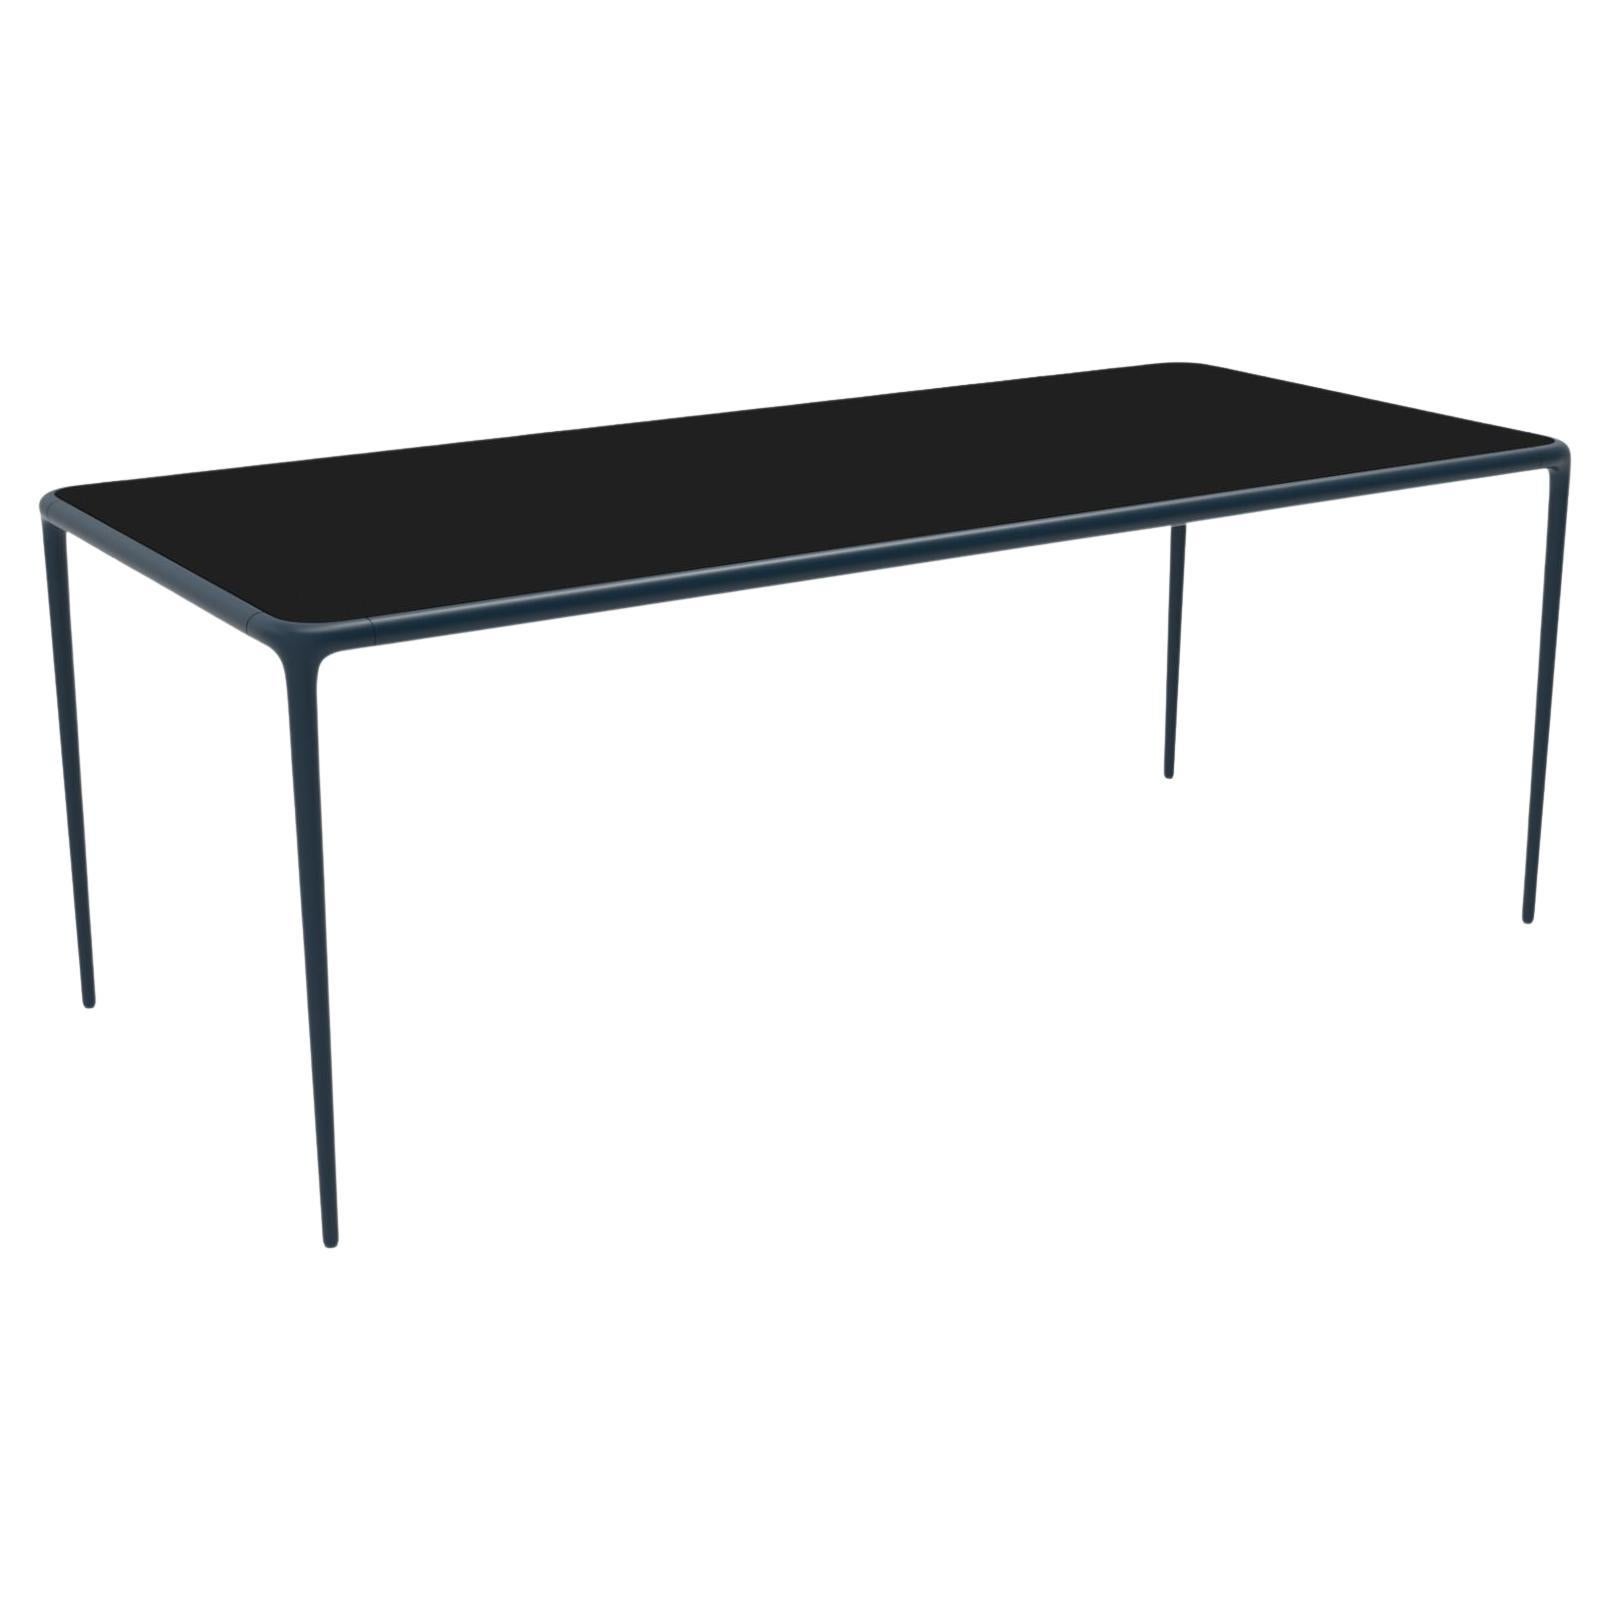 Xaloc Navy Glass Top Table 200 by Mowee